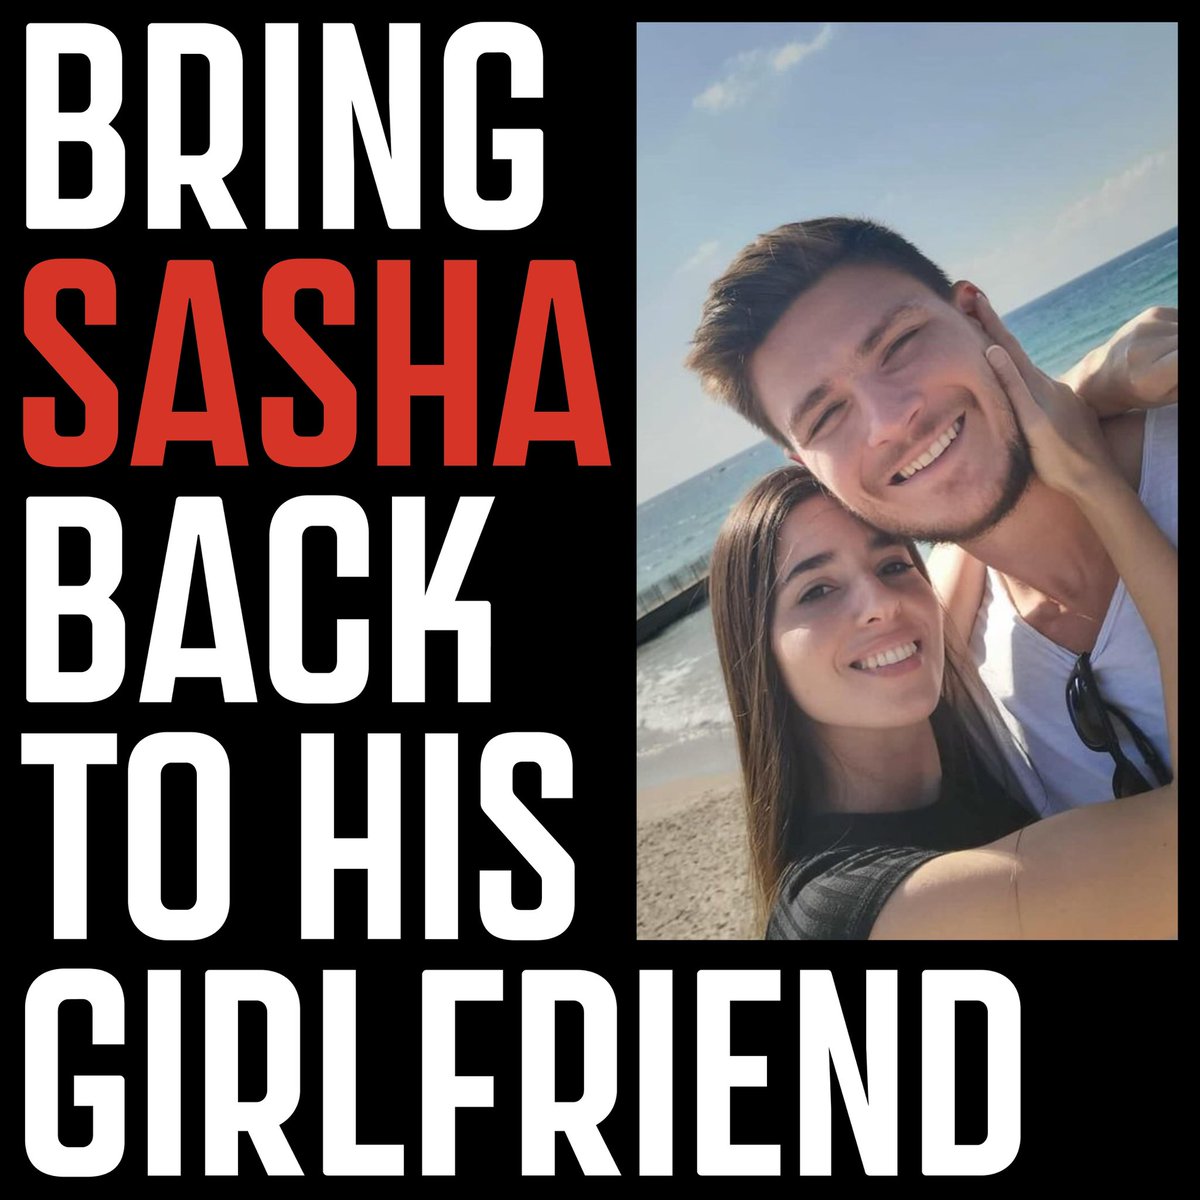 Every single hostage is a whole world. Sasha, so many people are waiting for you. We won’t stop fighting until you’re back 🎗️ #BringThemHomeNow